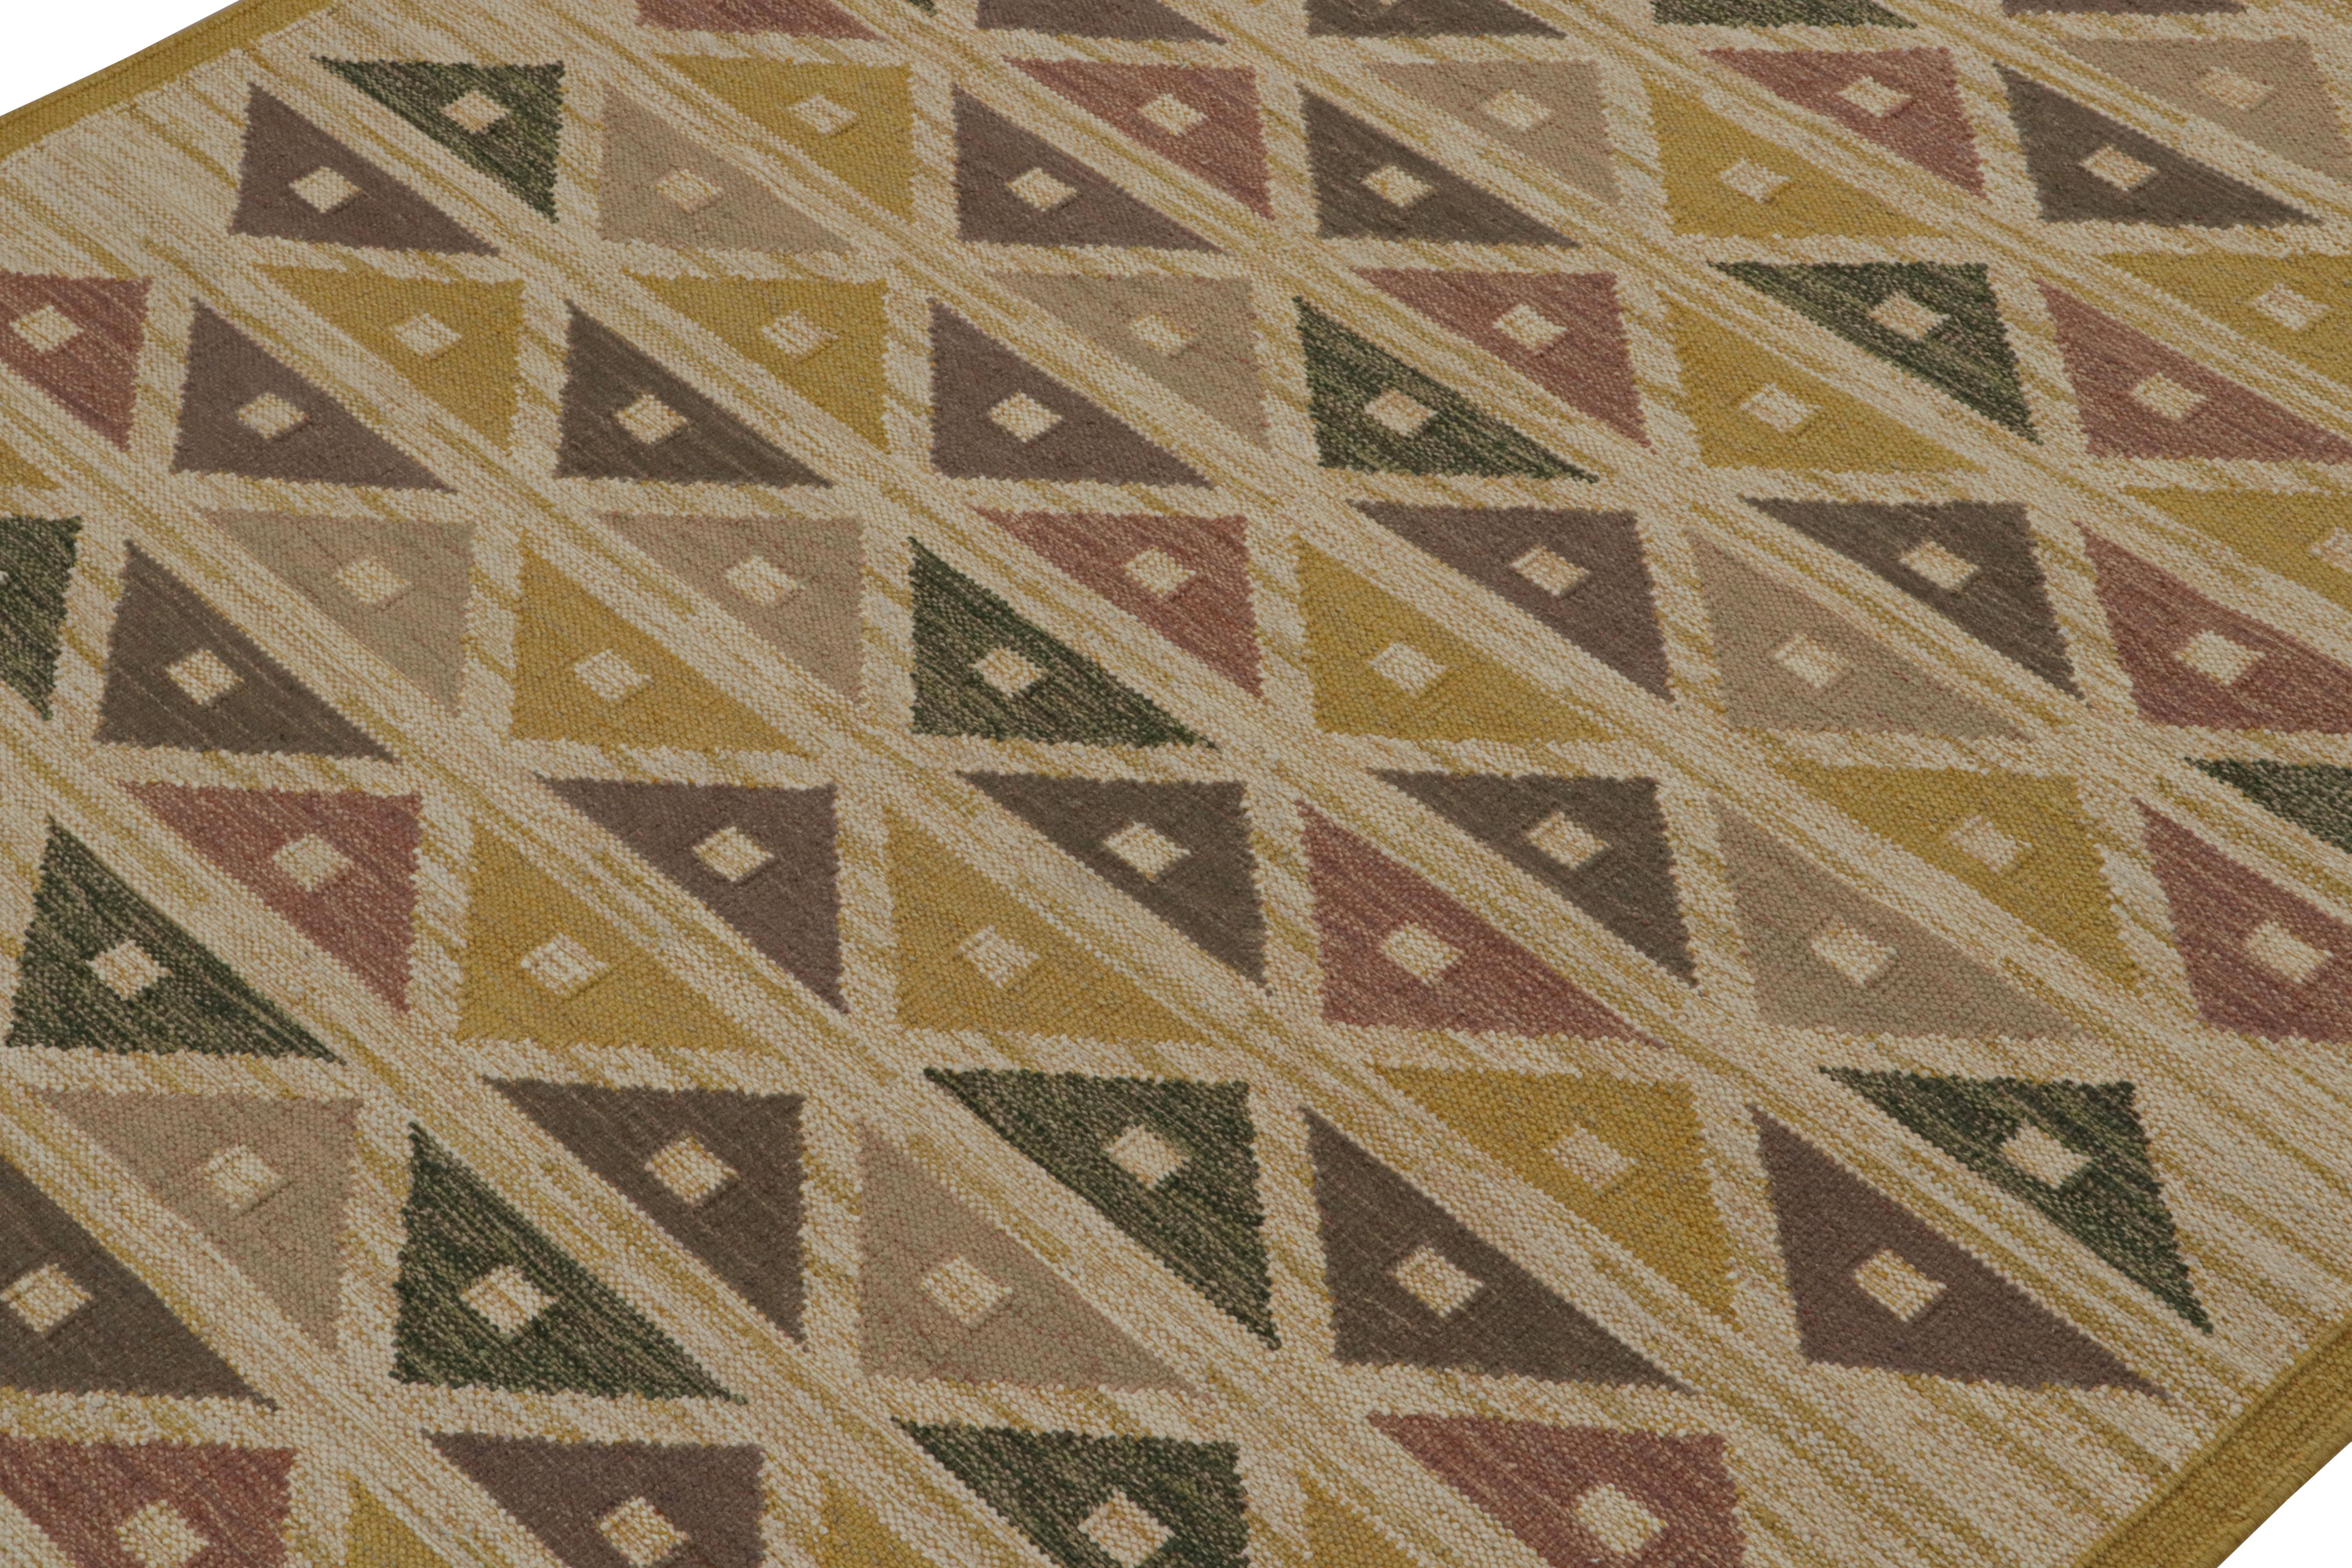 Indian Rug & Kilim’s Scandinavian style Kilim rug in Gold & Brown Geometric Patterns For Sale